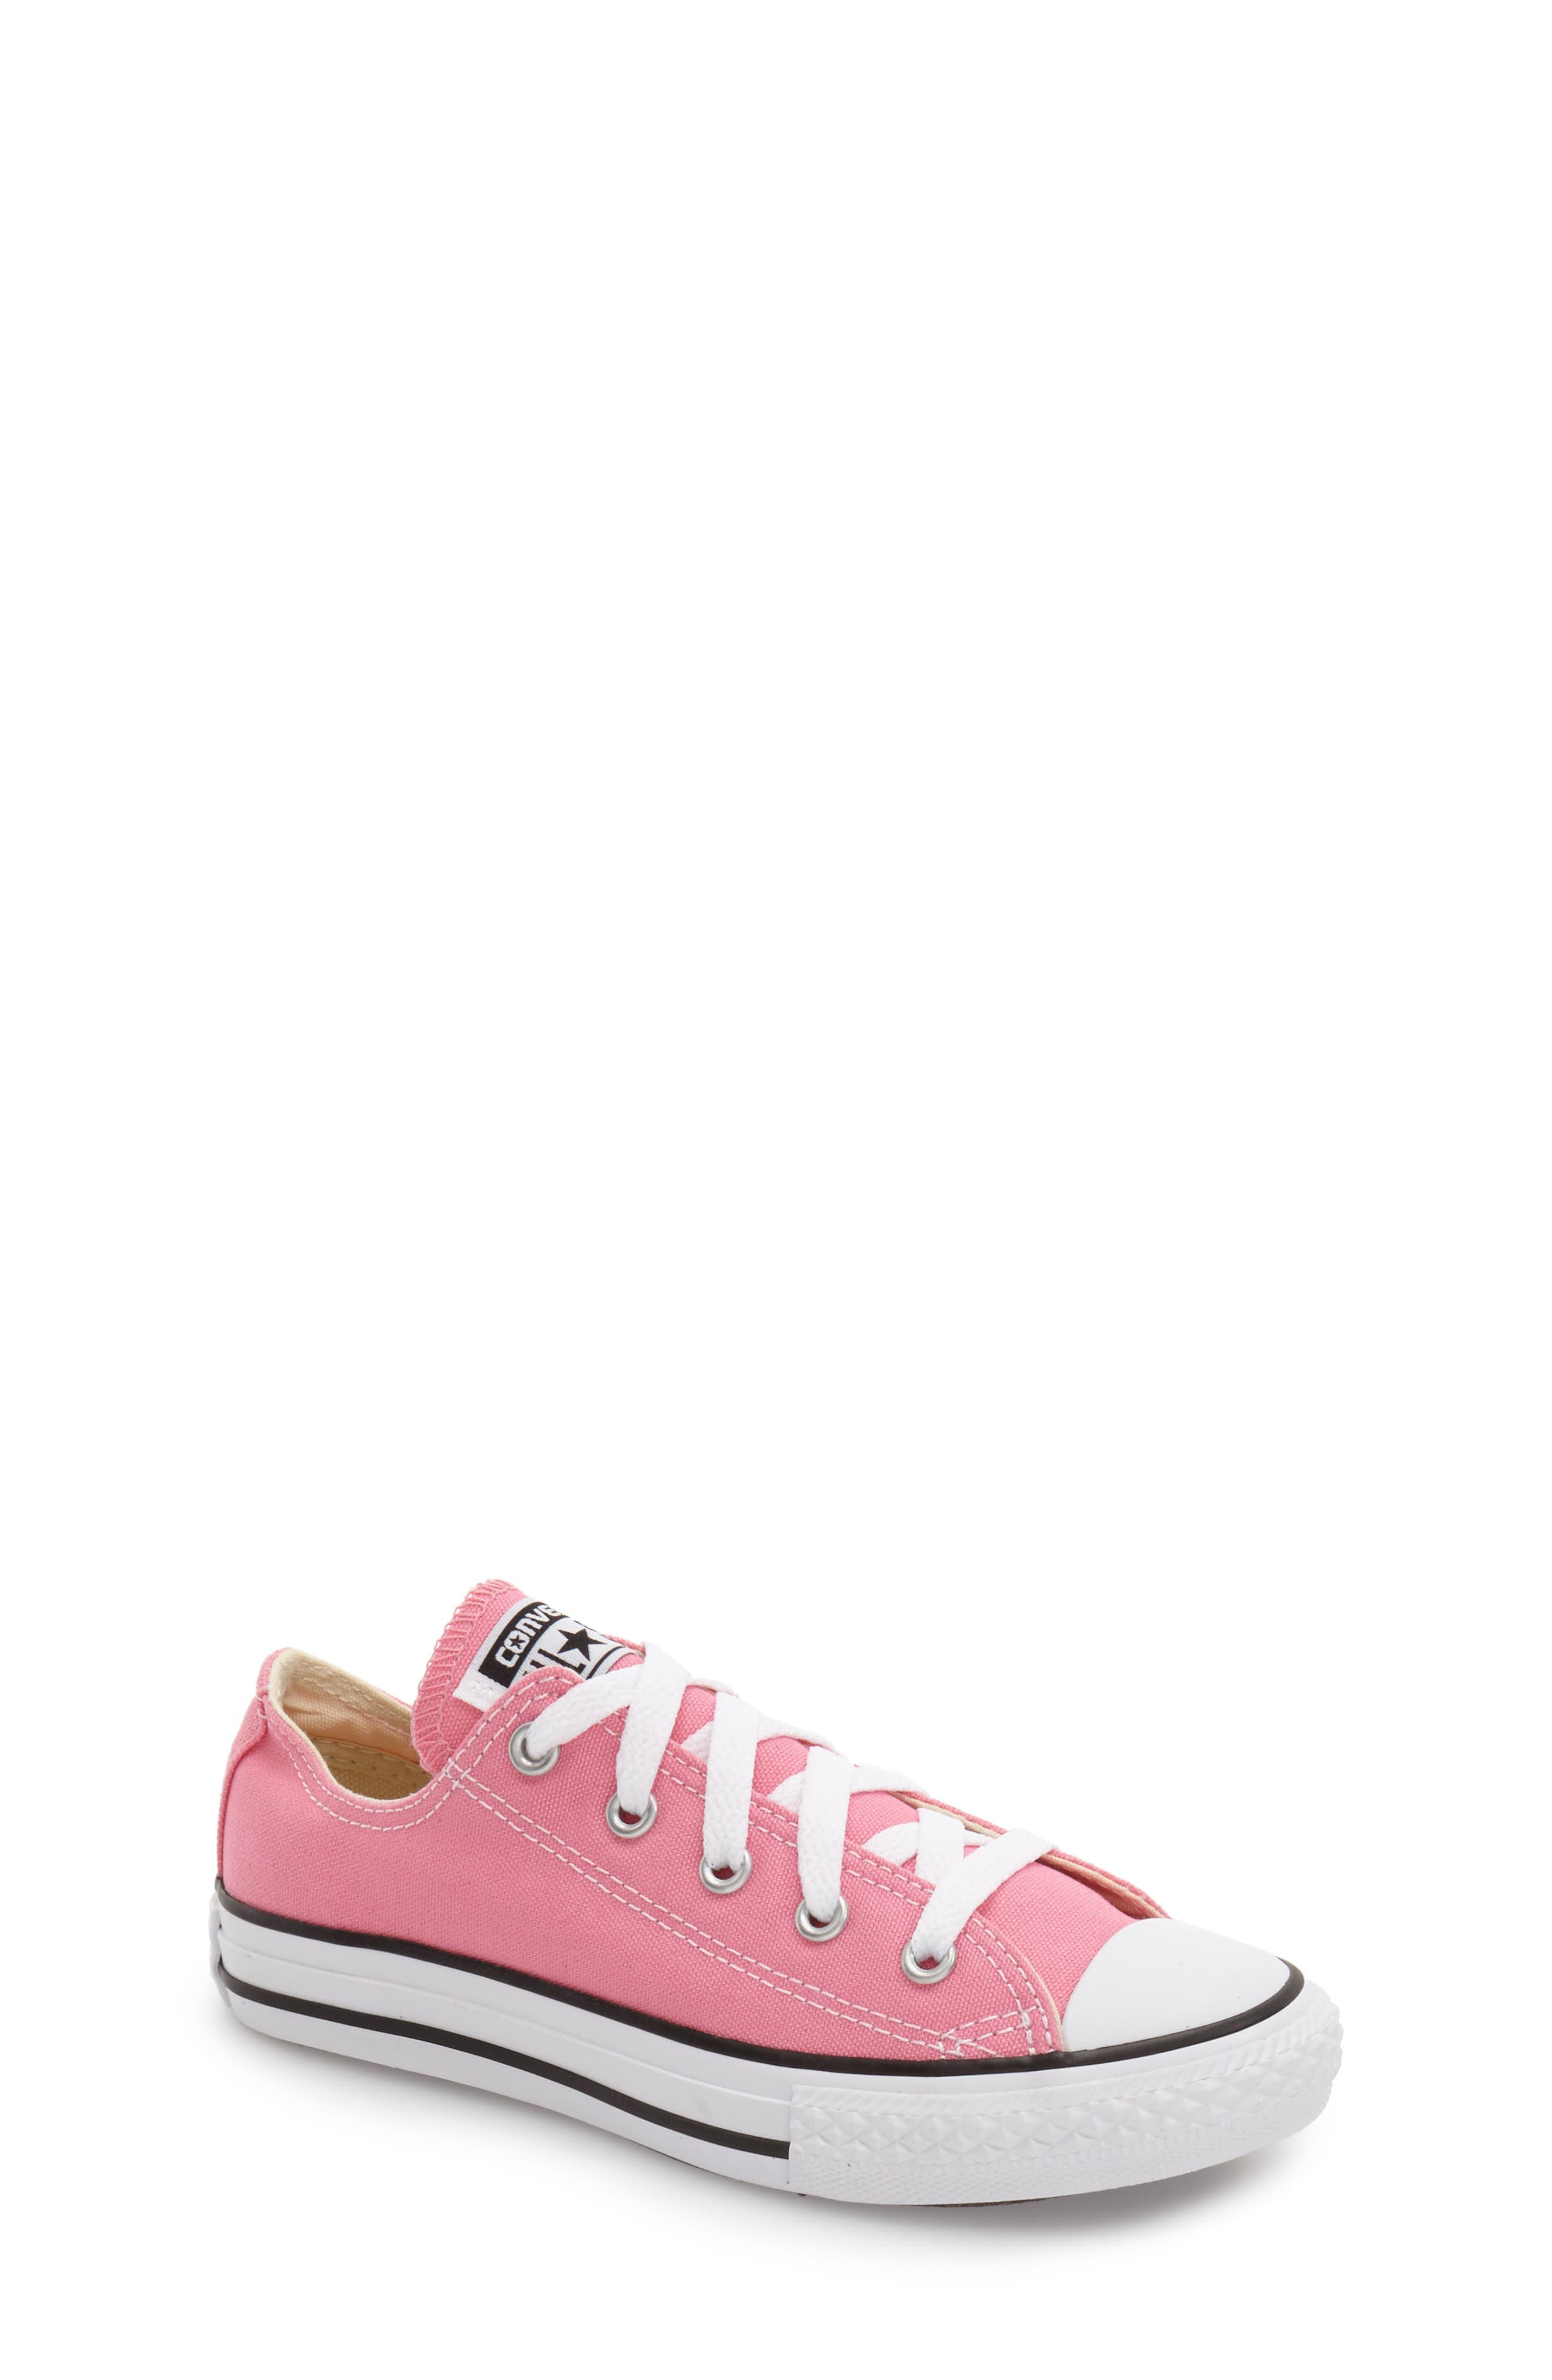 UPC 022866377621 product image for Converse Chuck Taylor Sneaker (Toddler & Little Kid) Pink 12 M | upcitemdb.com